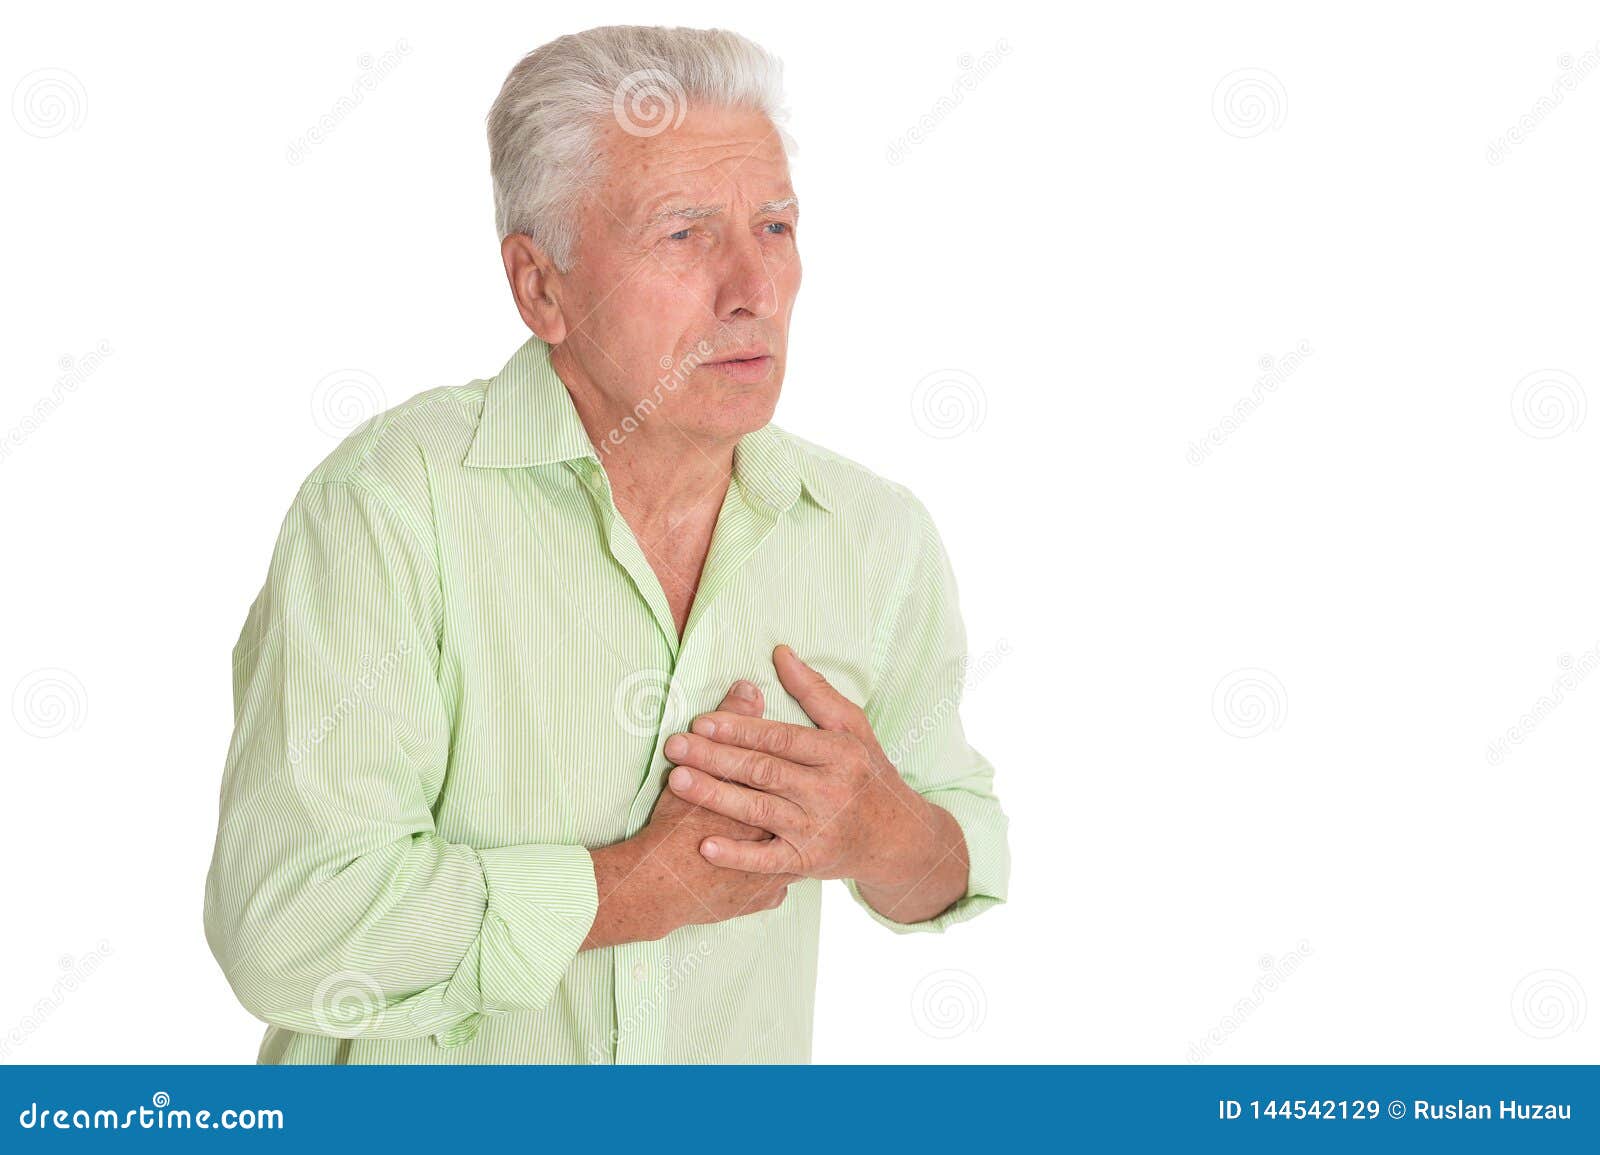 Portrait of Senior Man Holding Hands on Chest Stock Image - Image of ...